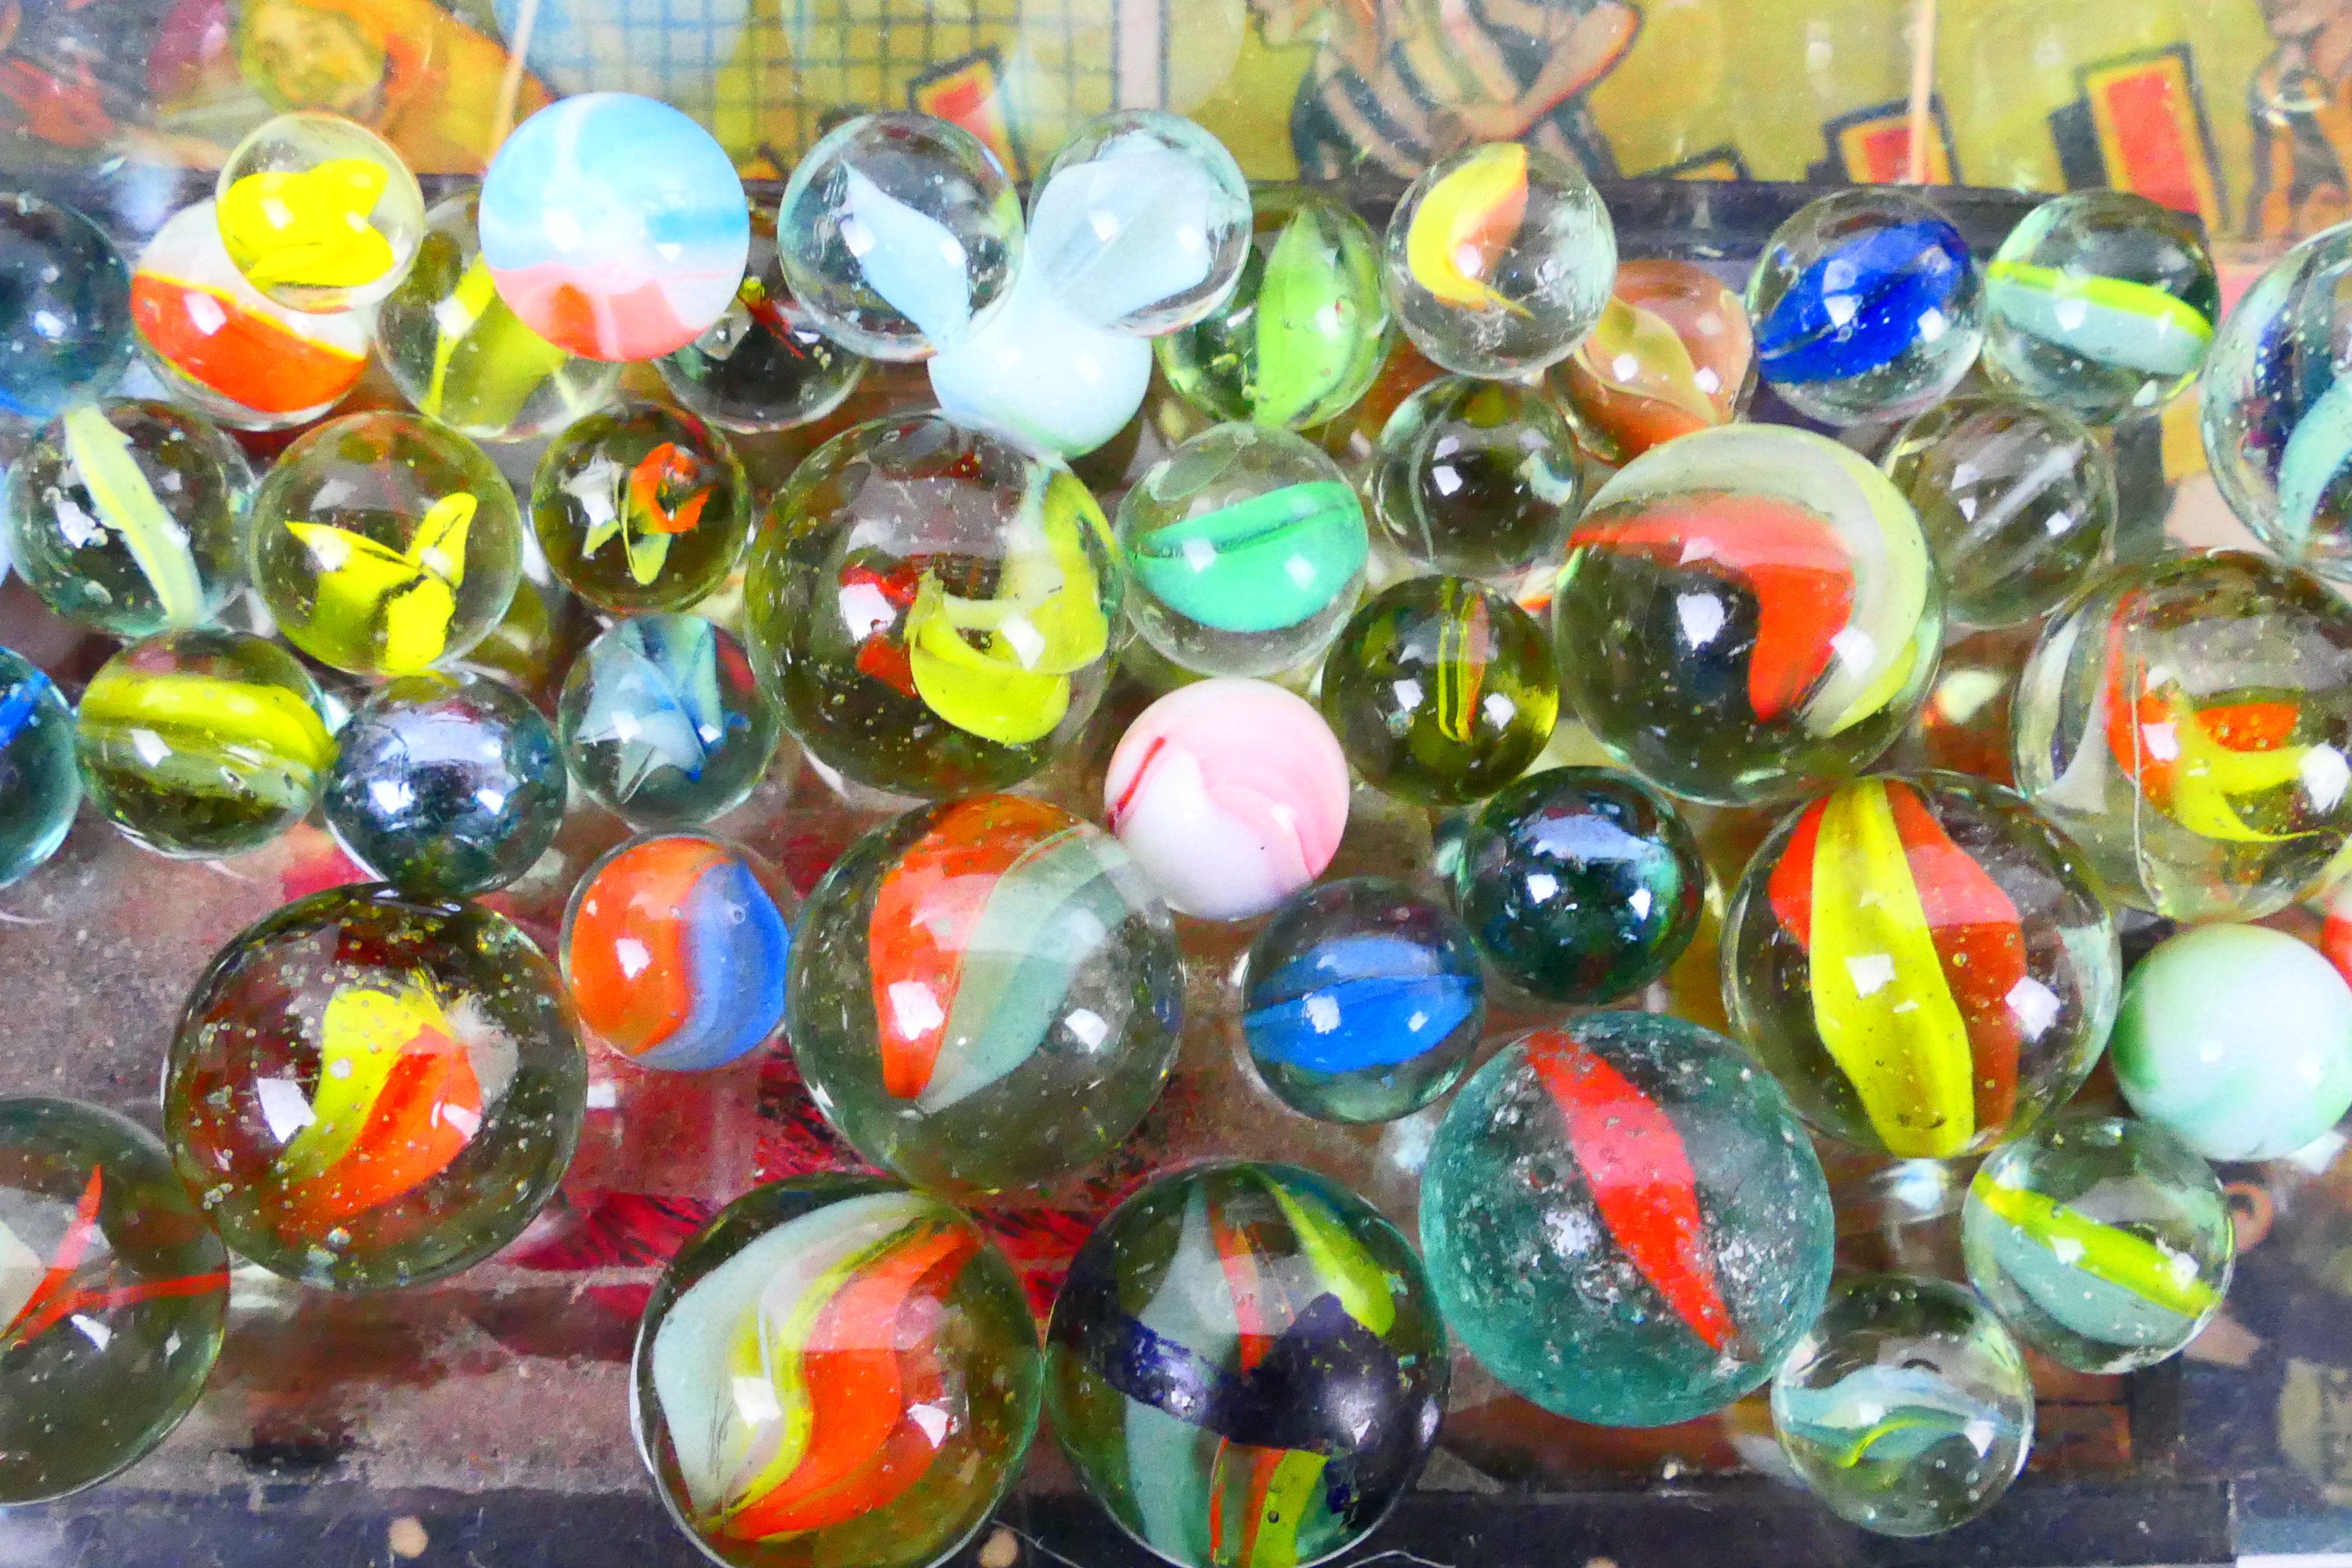 Marbles - Kim Toys - Cherilea - Hilco - A collection of vintage toys including marbles, - Image 9 of 10